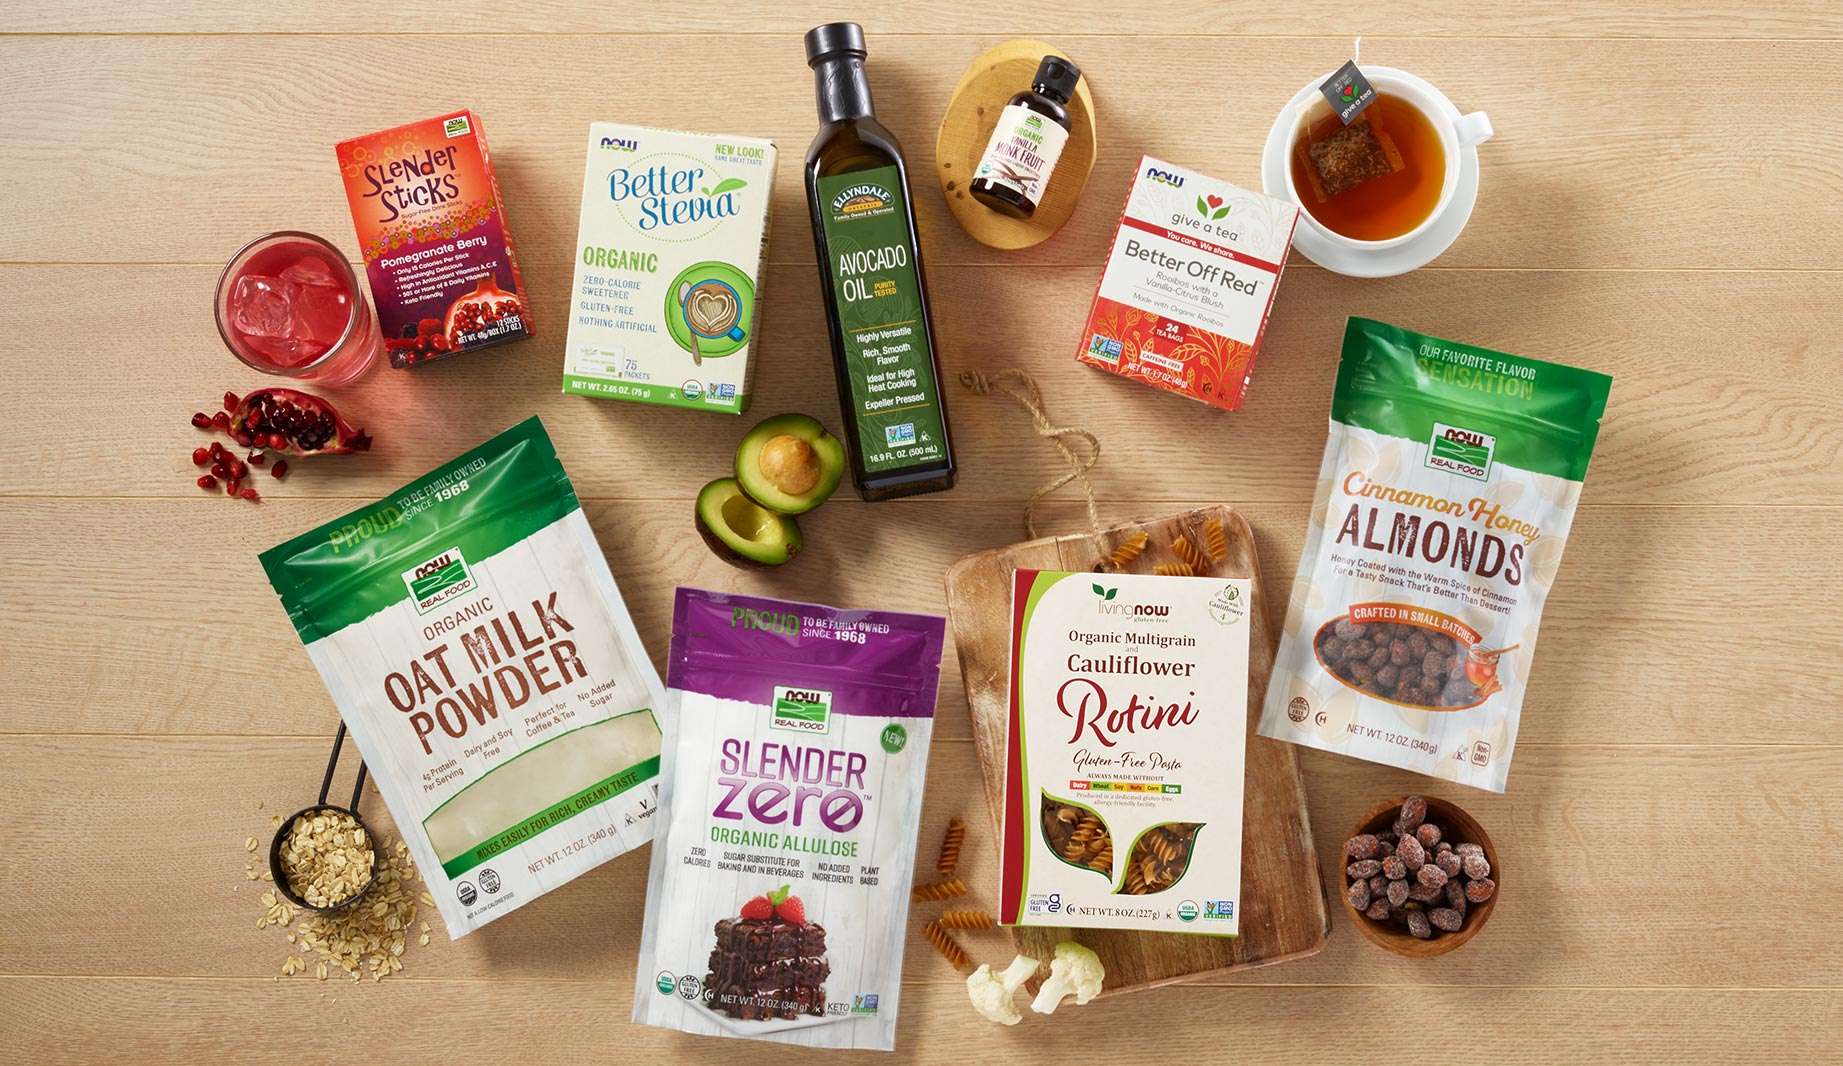 Group of Natural Food Products Including; Slender Sticks, Better Stevia, Avocado Oil, Monk Fruit, Give a Tea, Almonds, Cauliflower Rotini, Slender Zero Allulose and Oat Milk Powder